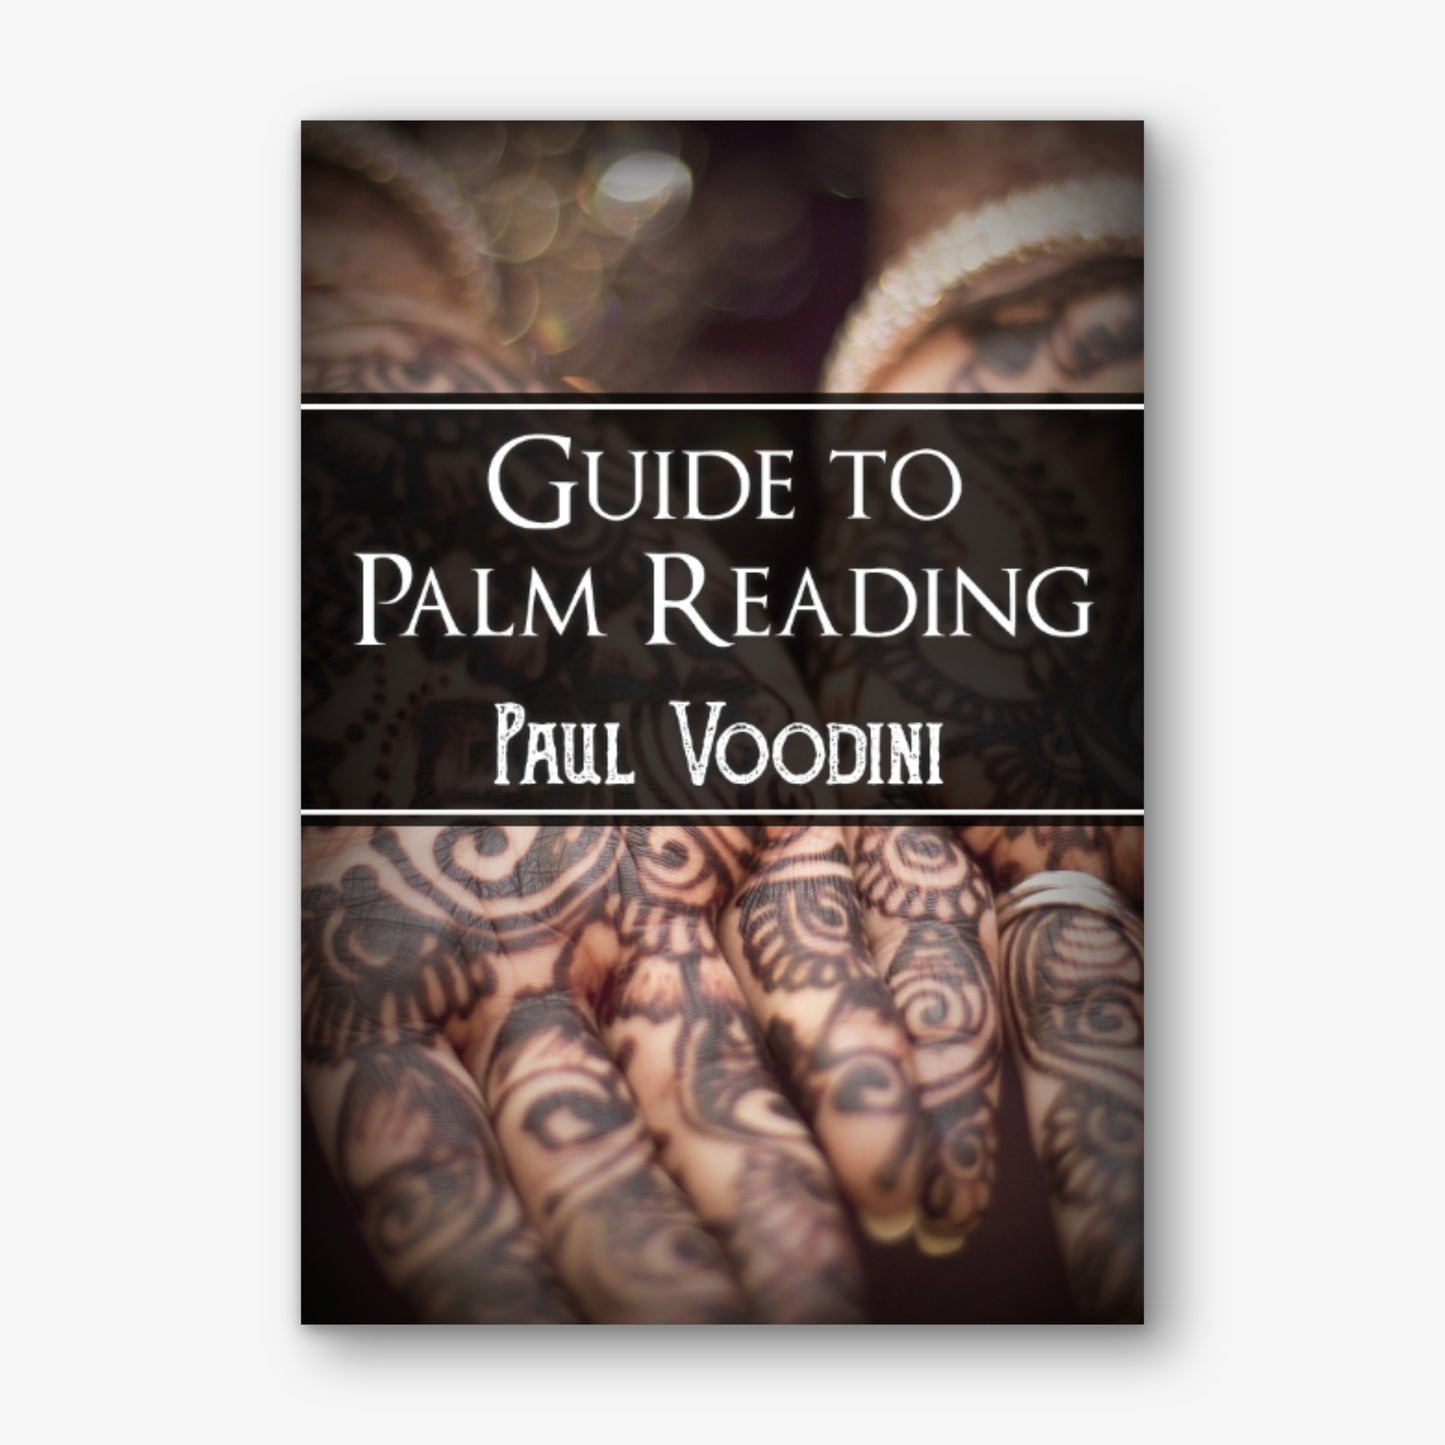 Guide to Palm Reading by Paul Voodini